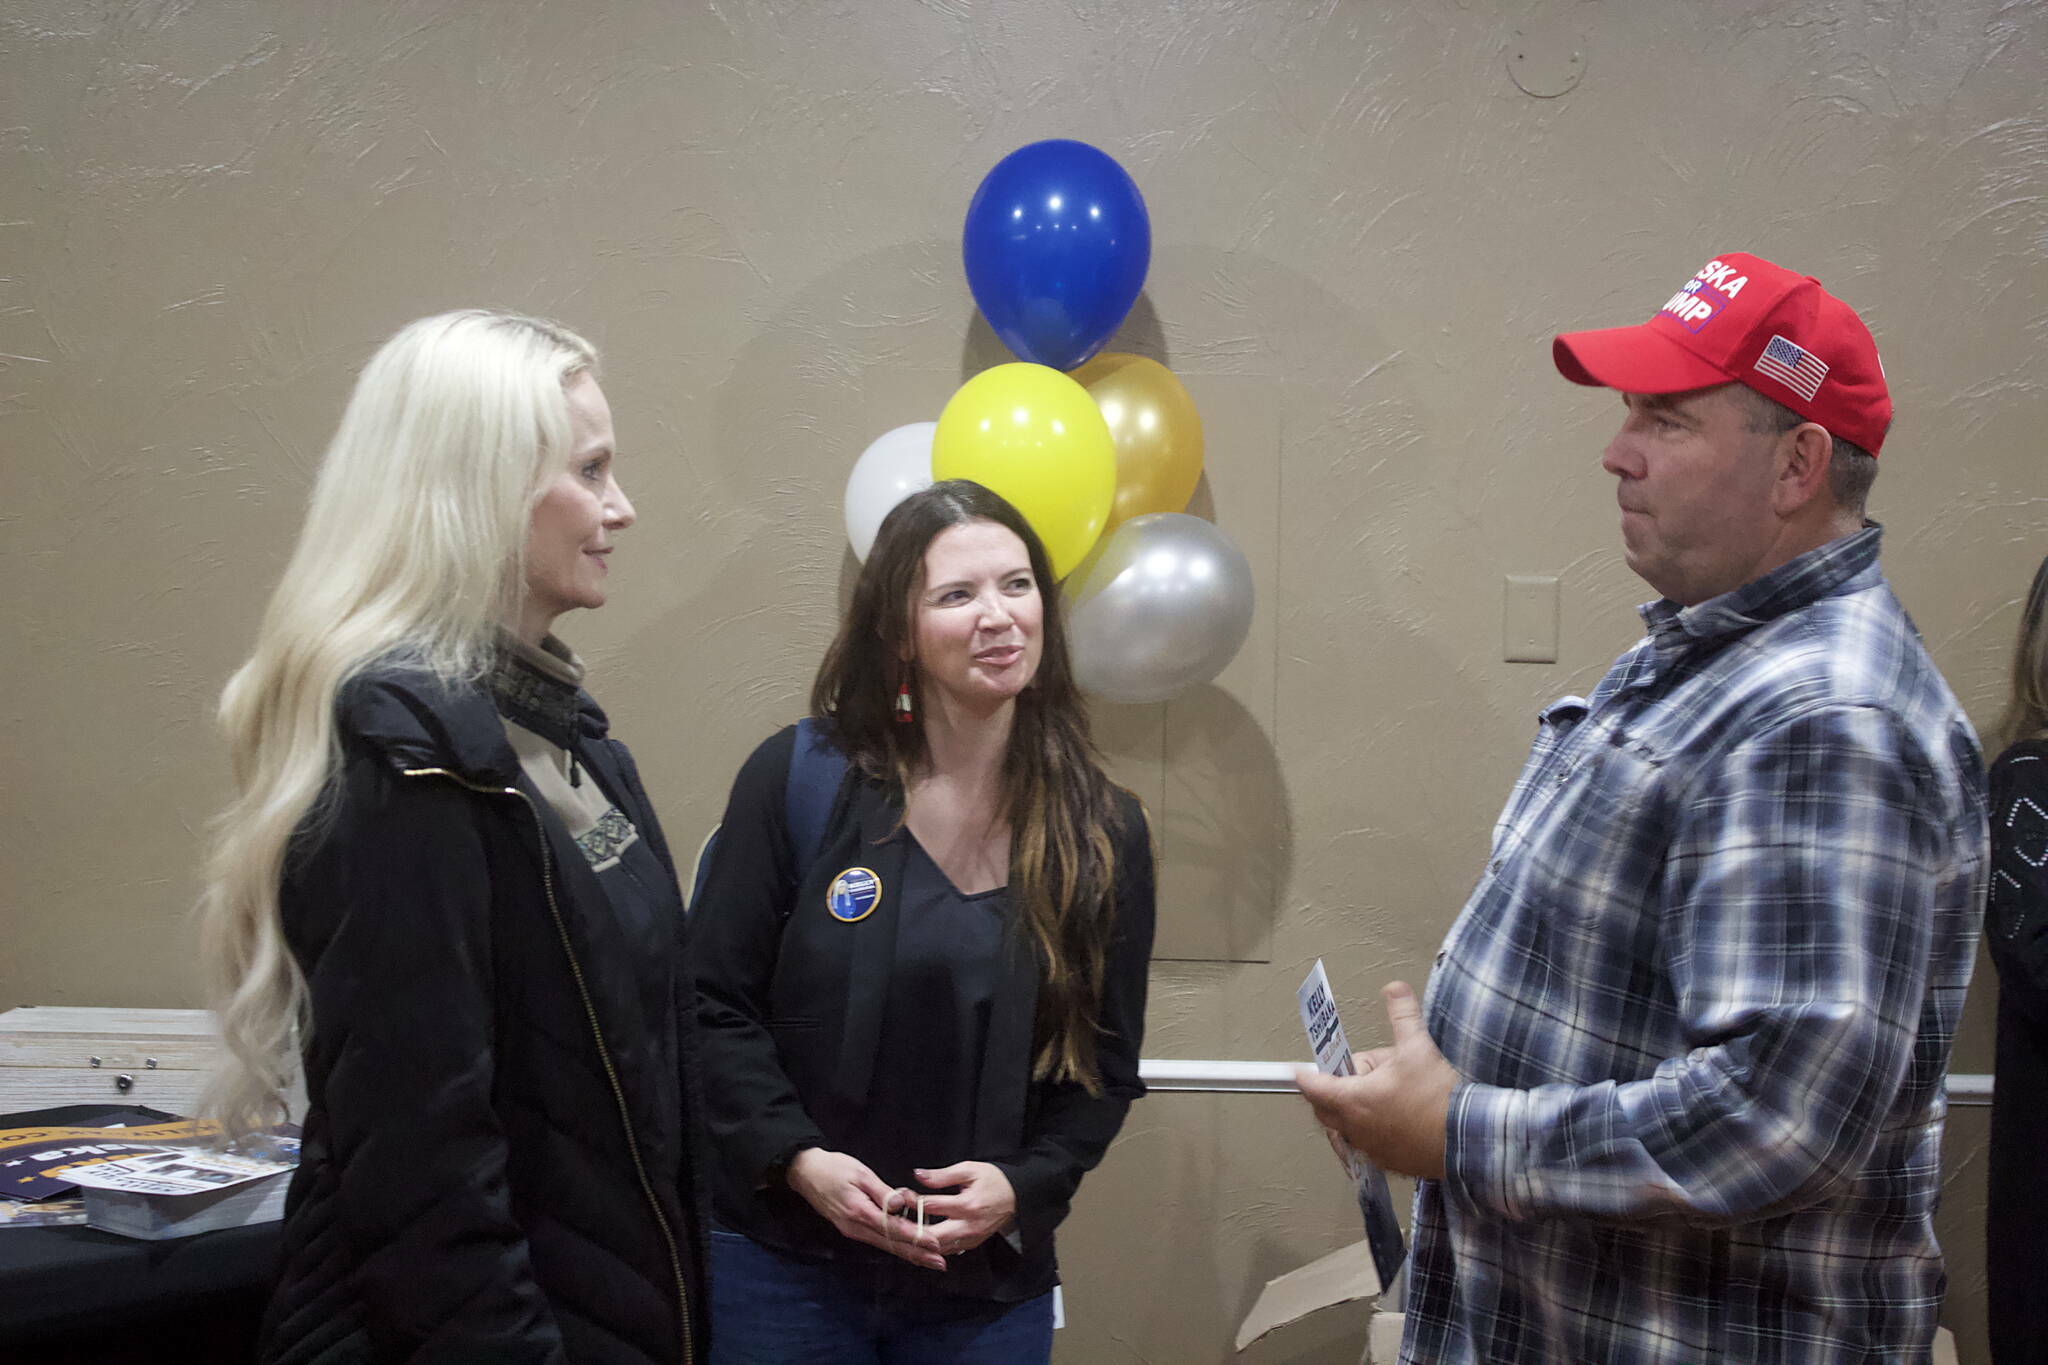 Kelly Tshibaka, left, chats with Juneau residents during a local church visit in September as part of her unsuccessful U.S. Senate campaign. Political pundits say she is among those who could emerge this year as a strong challenger in the 2024 Congressional election or as a national media figure based on her Donald Trump-backed performance. (Mark Sabbatini / Juneau Empire).